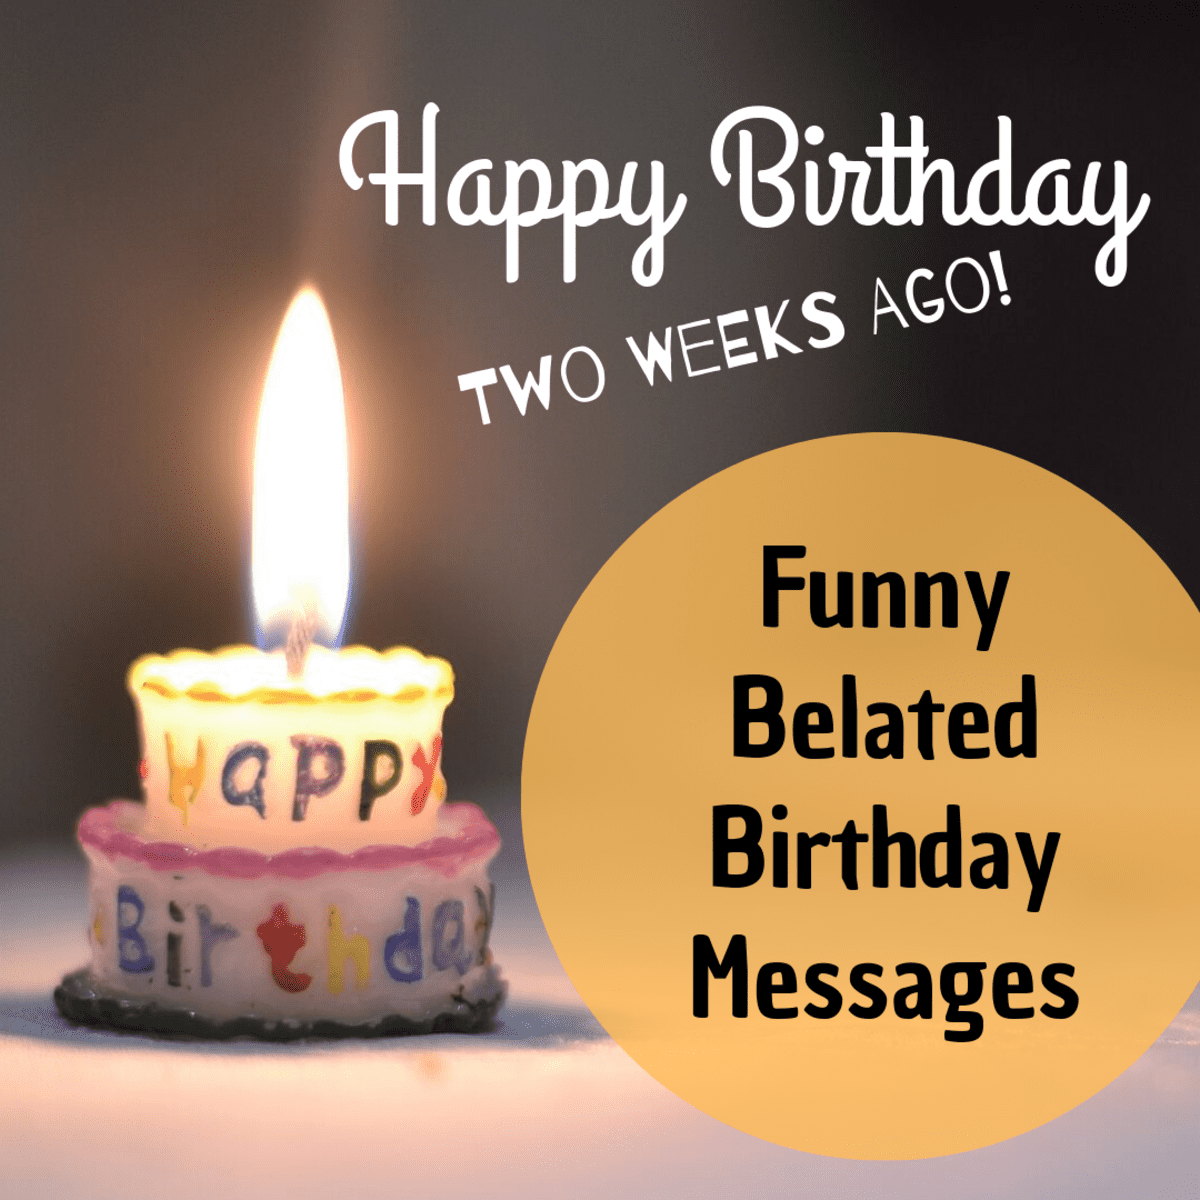 Funny Belated Happy Birthday Wishes: Late Messages and Greetings - Holidappy